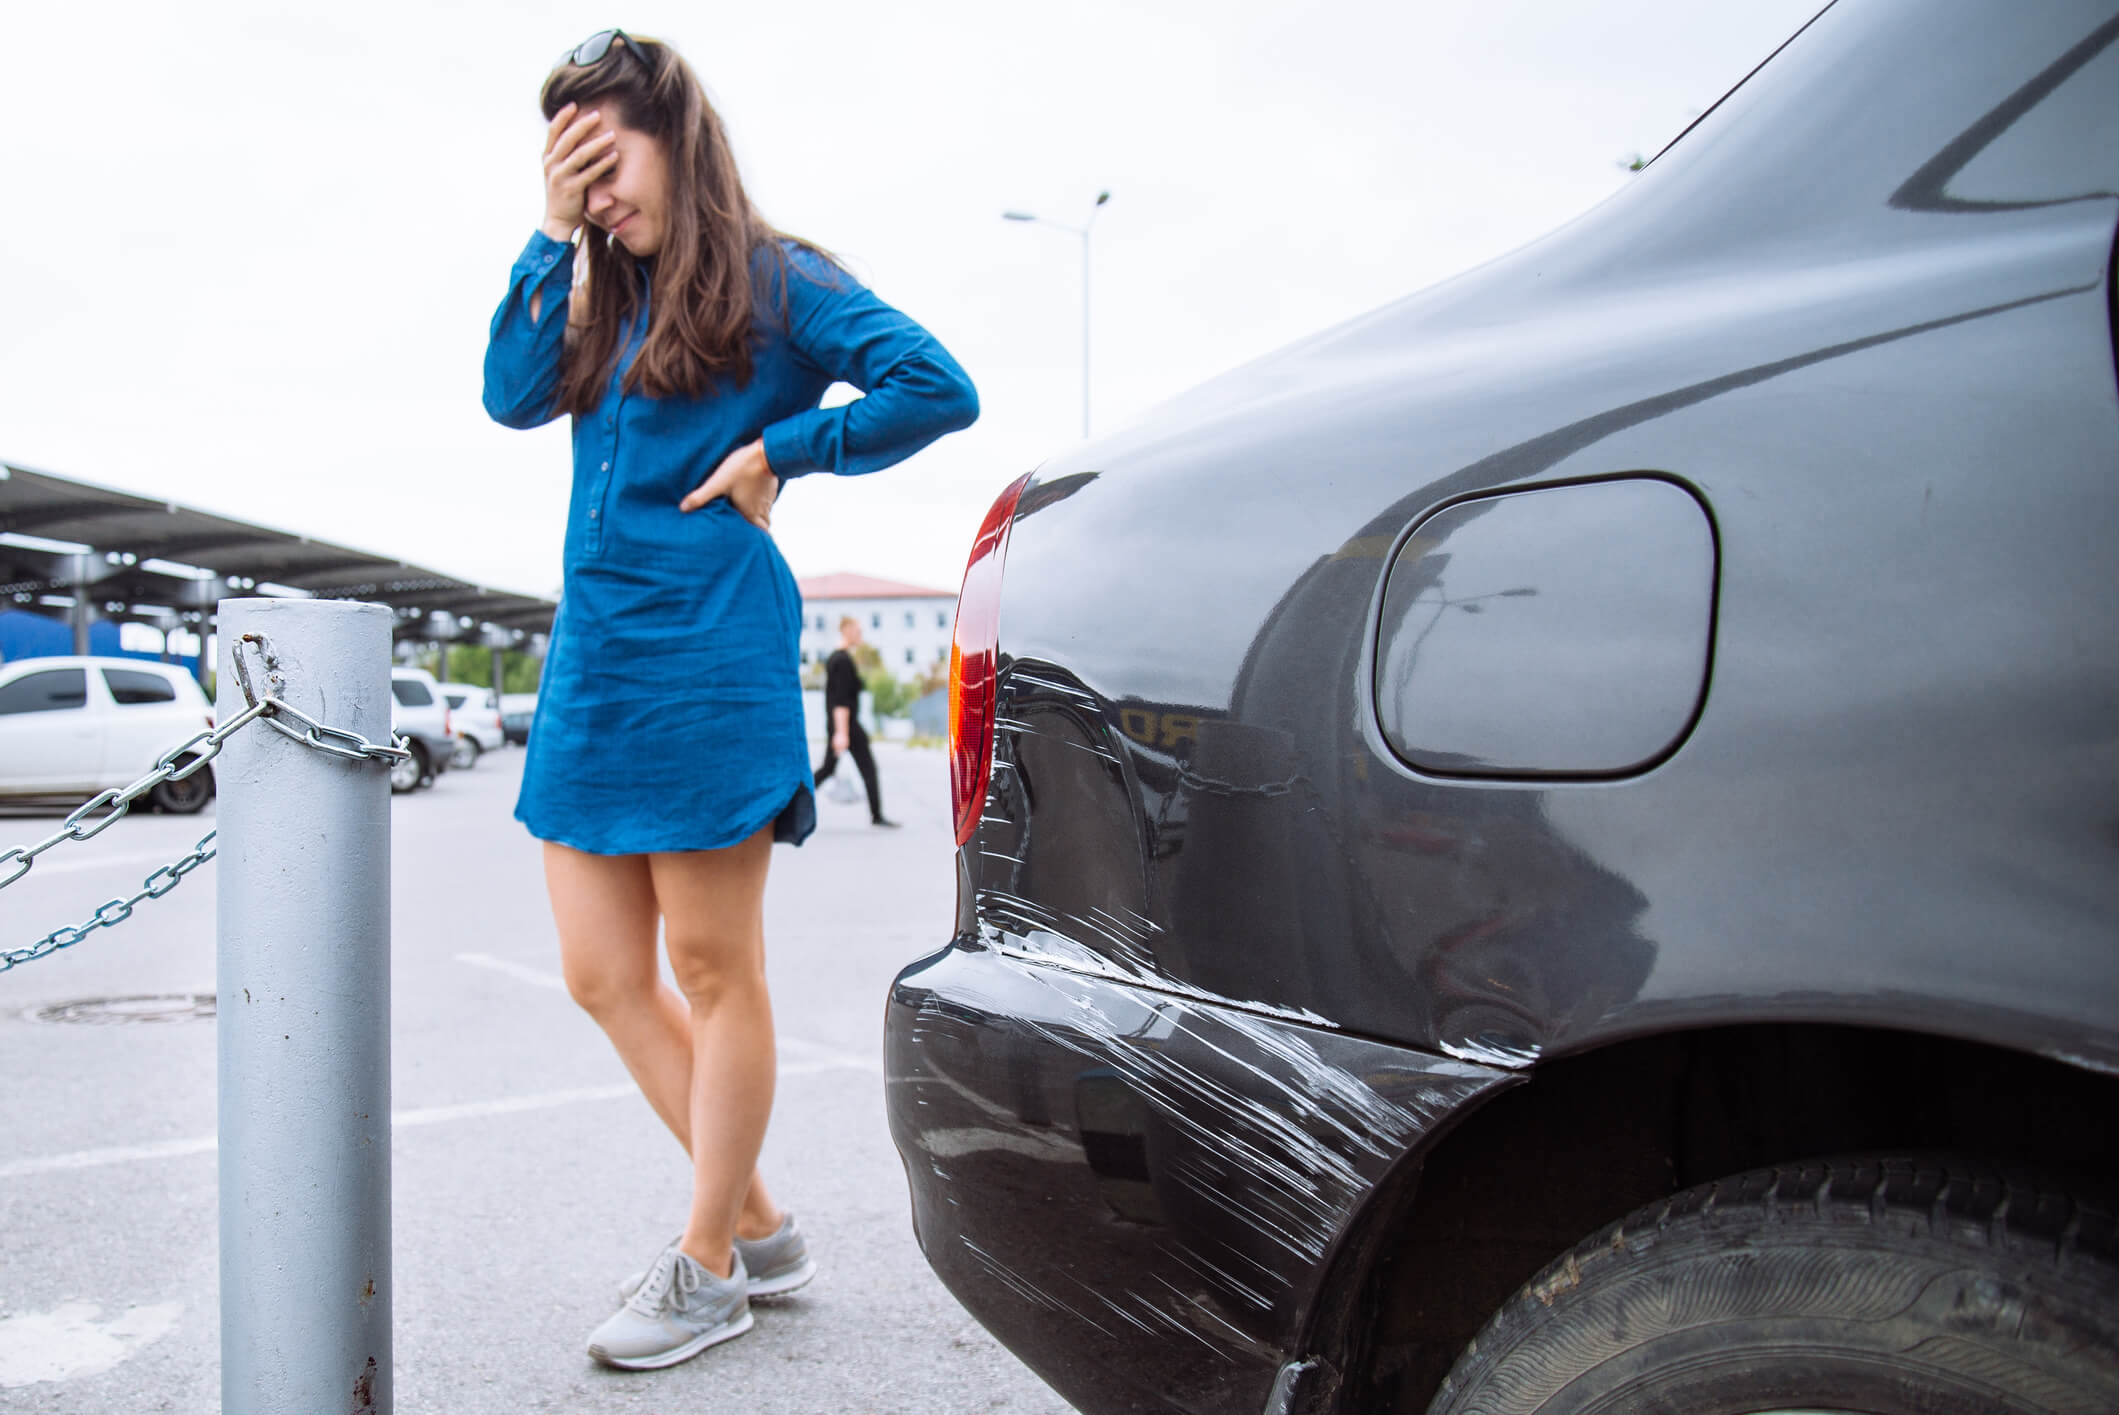 a woman in a blue dress is distressed in the background as her car has gotten into a vehicle accident